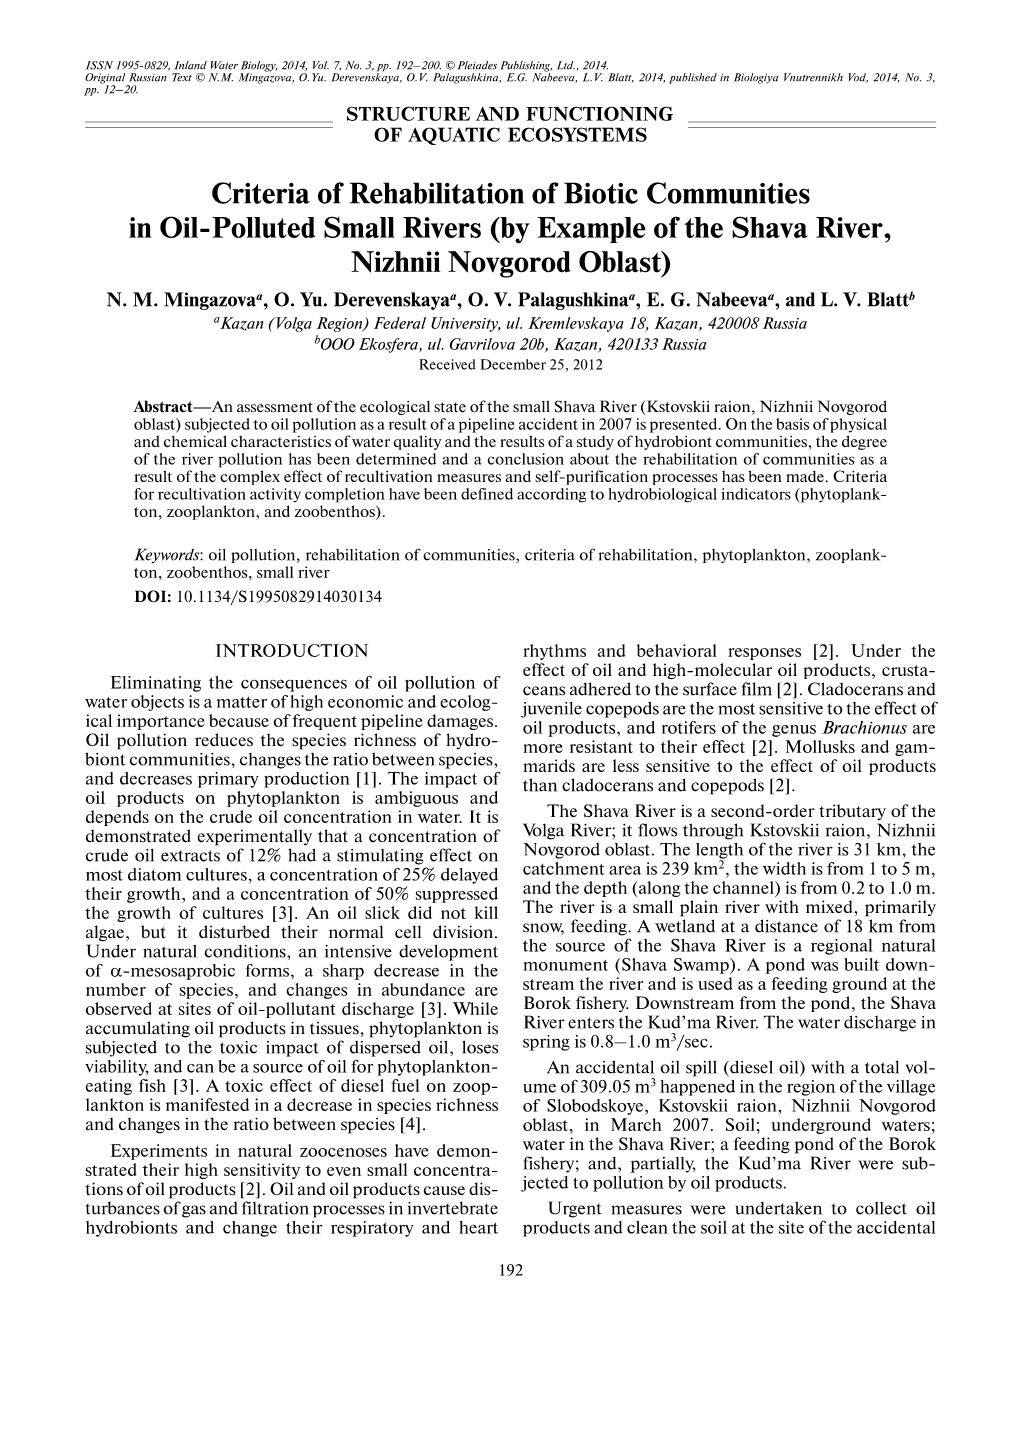 Criteria of Rehabilitation of Biotic Communities in Oil Polluted Small Rivers (By Example of the Shava River, Nizhnii Novgorod O